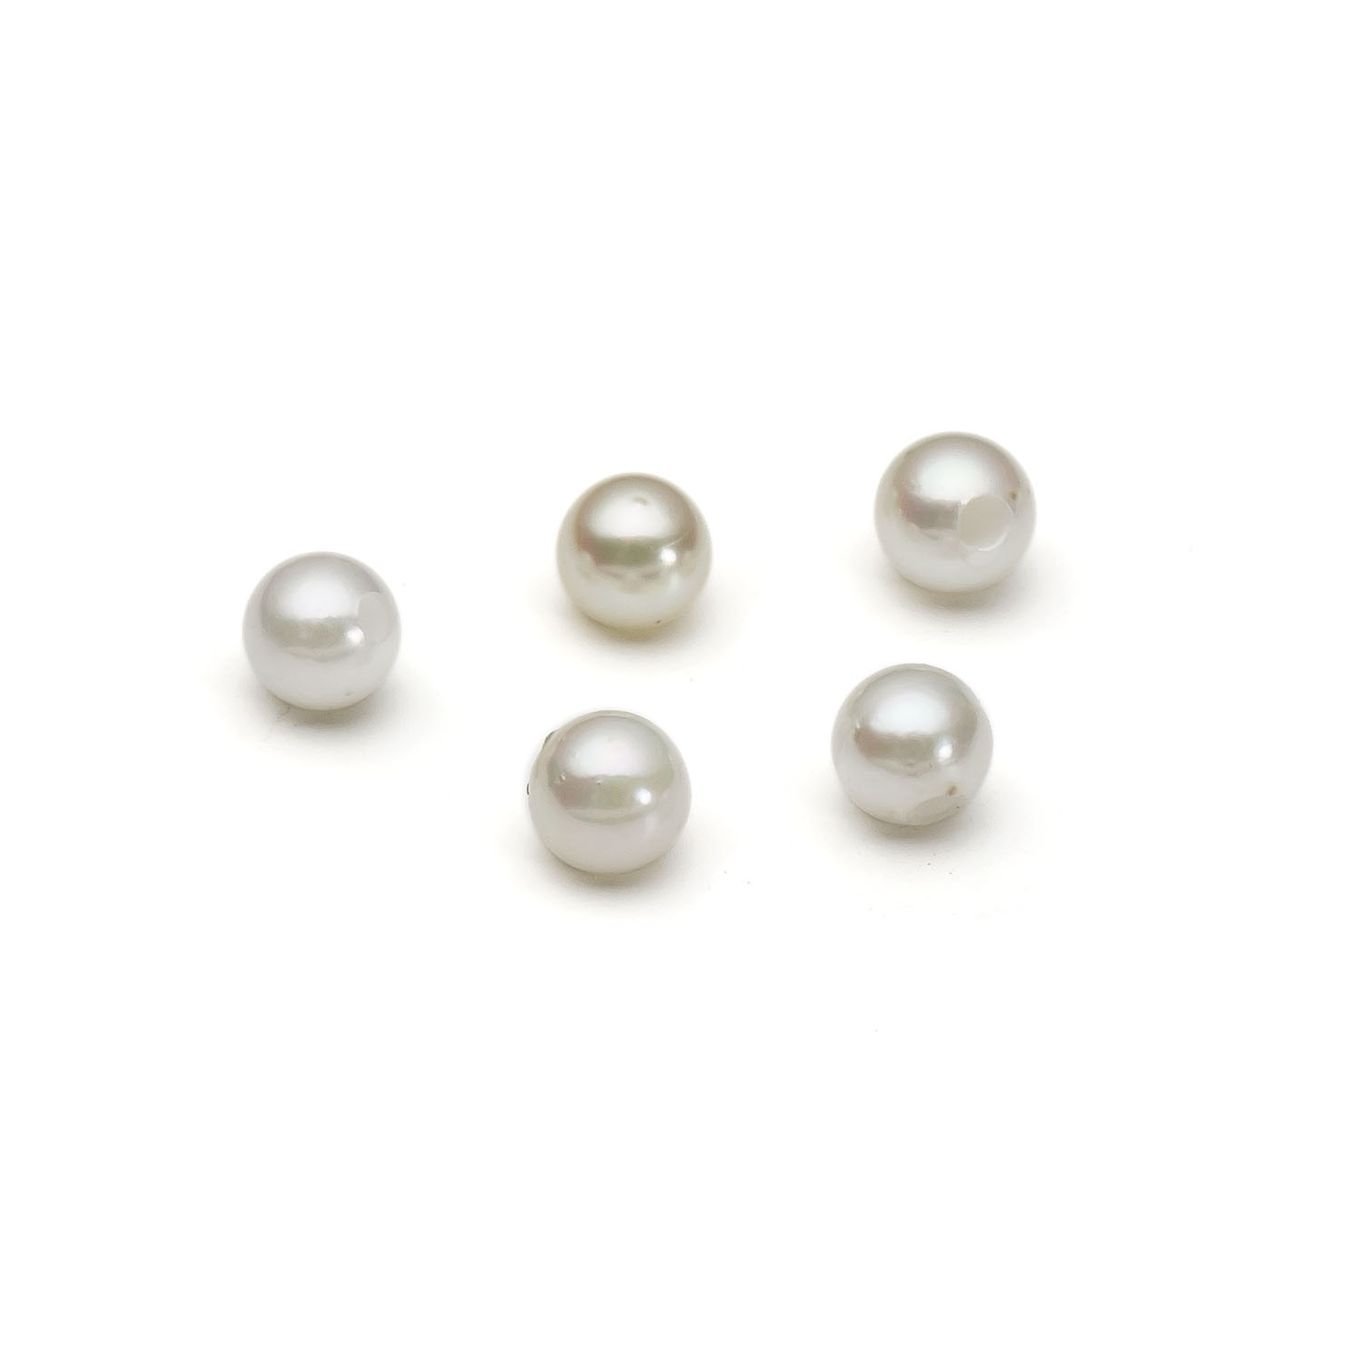 5700 AB White Half Pearls for Crafts - Flatback Pearls/Jewels